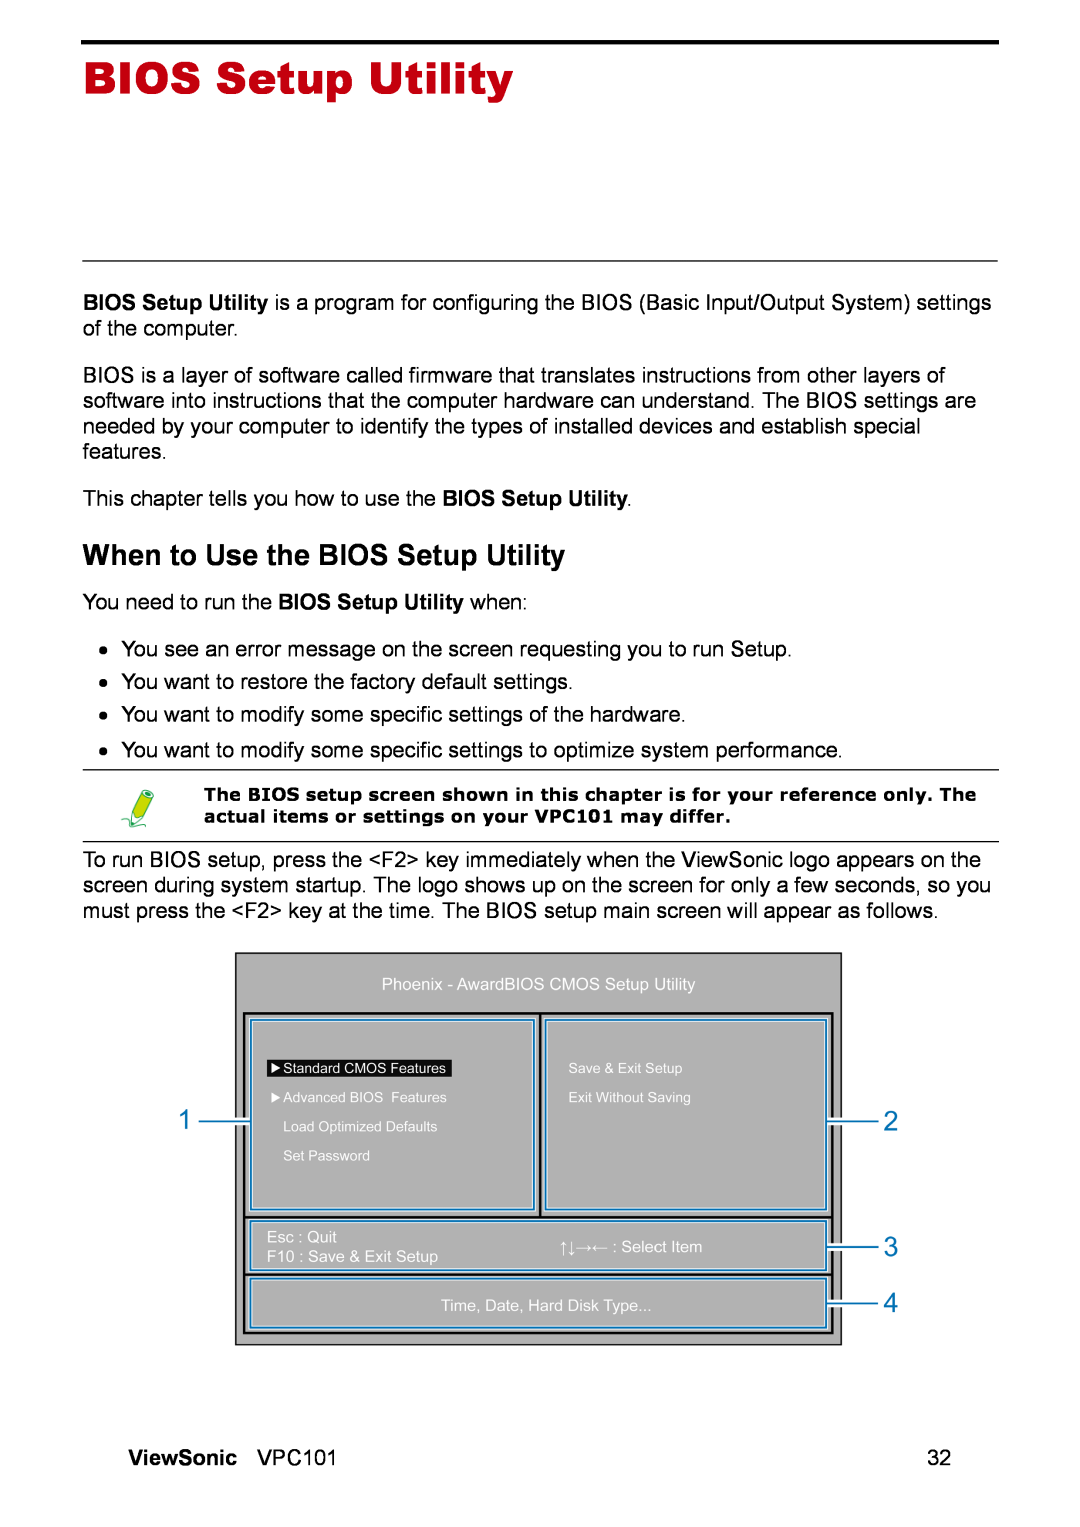 ViewSonic VPC101 manual When to Use the BIOS Setup Utility 